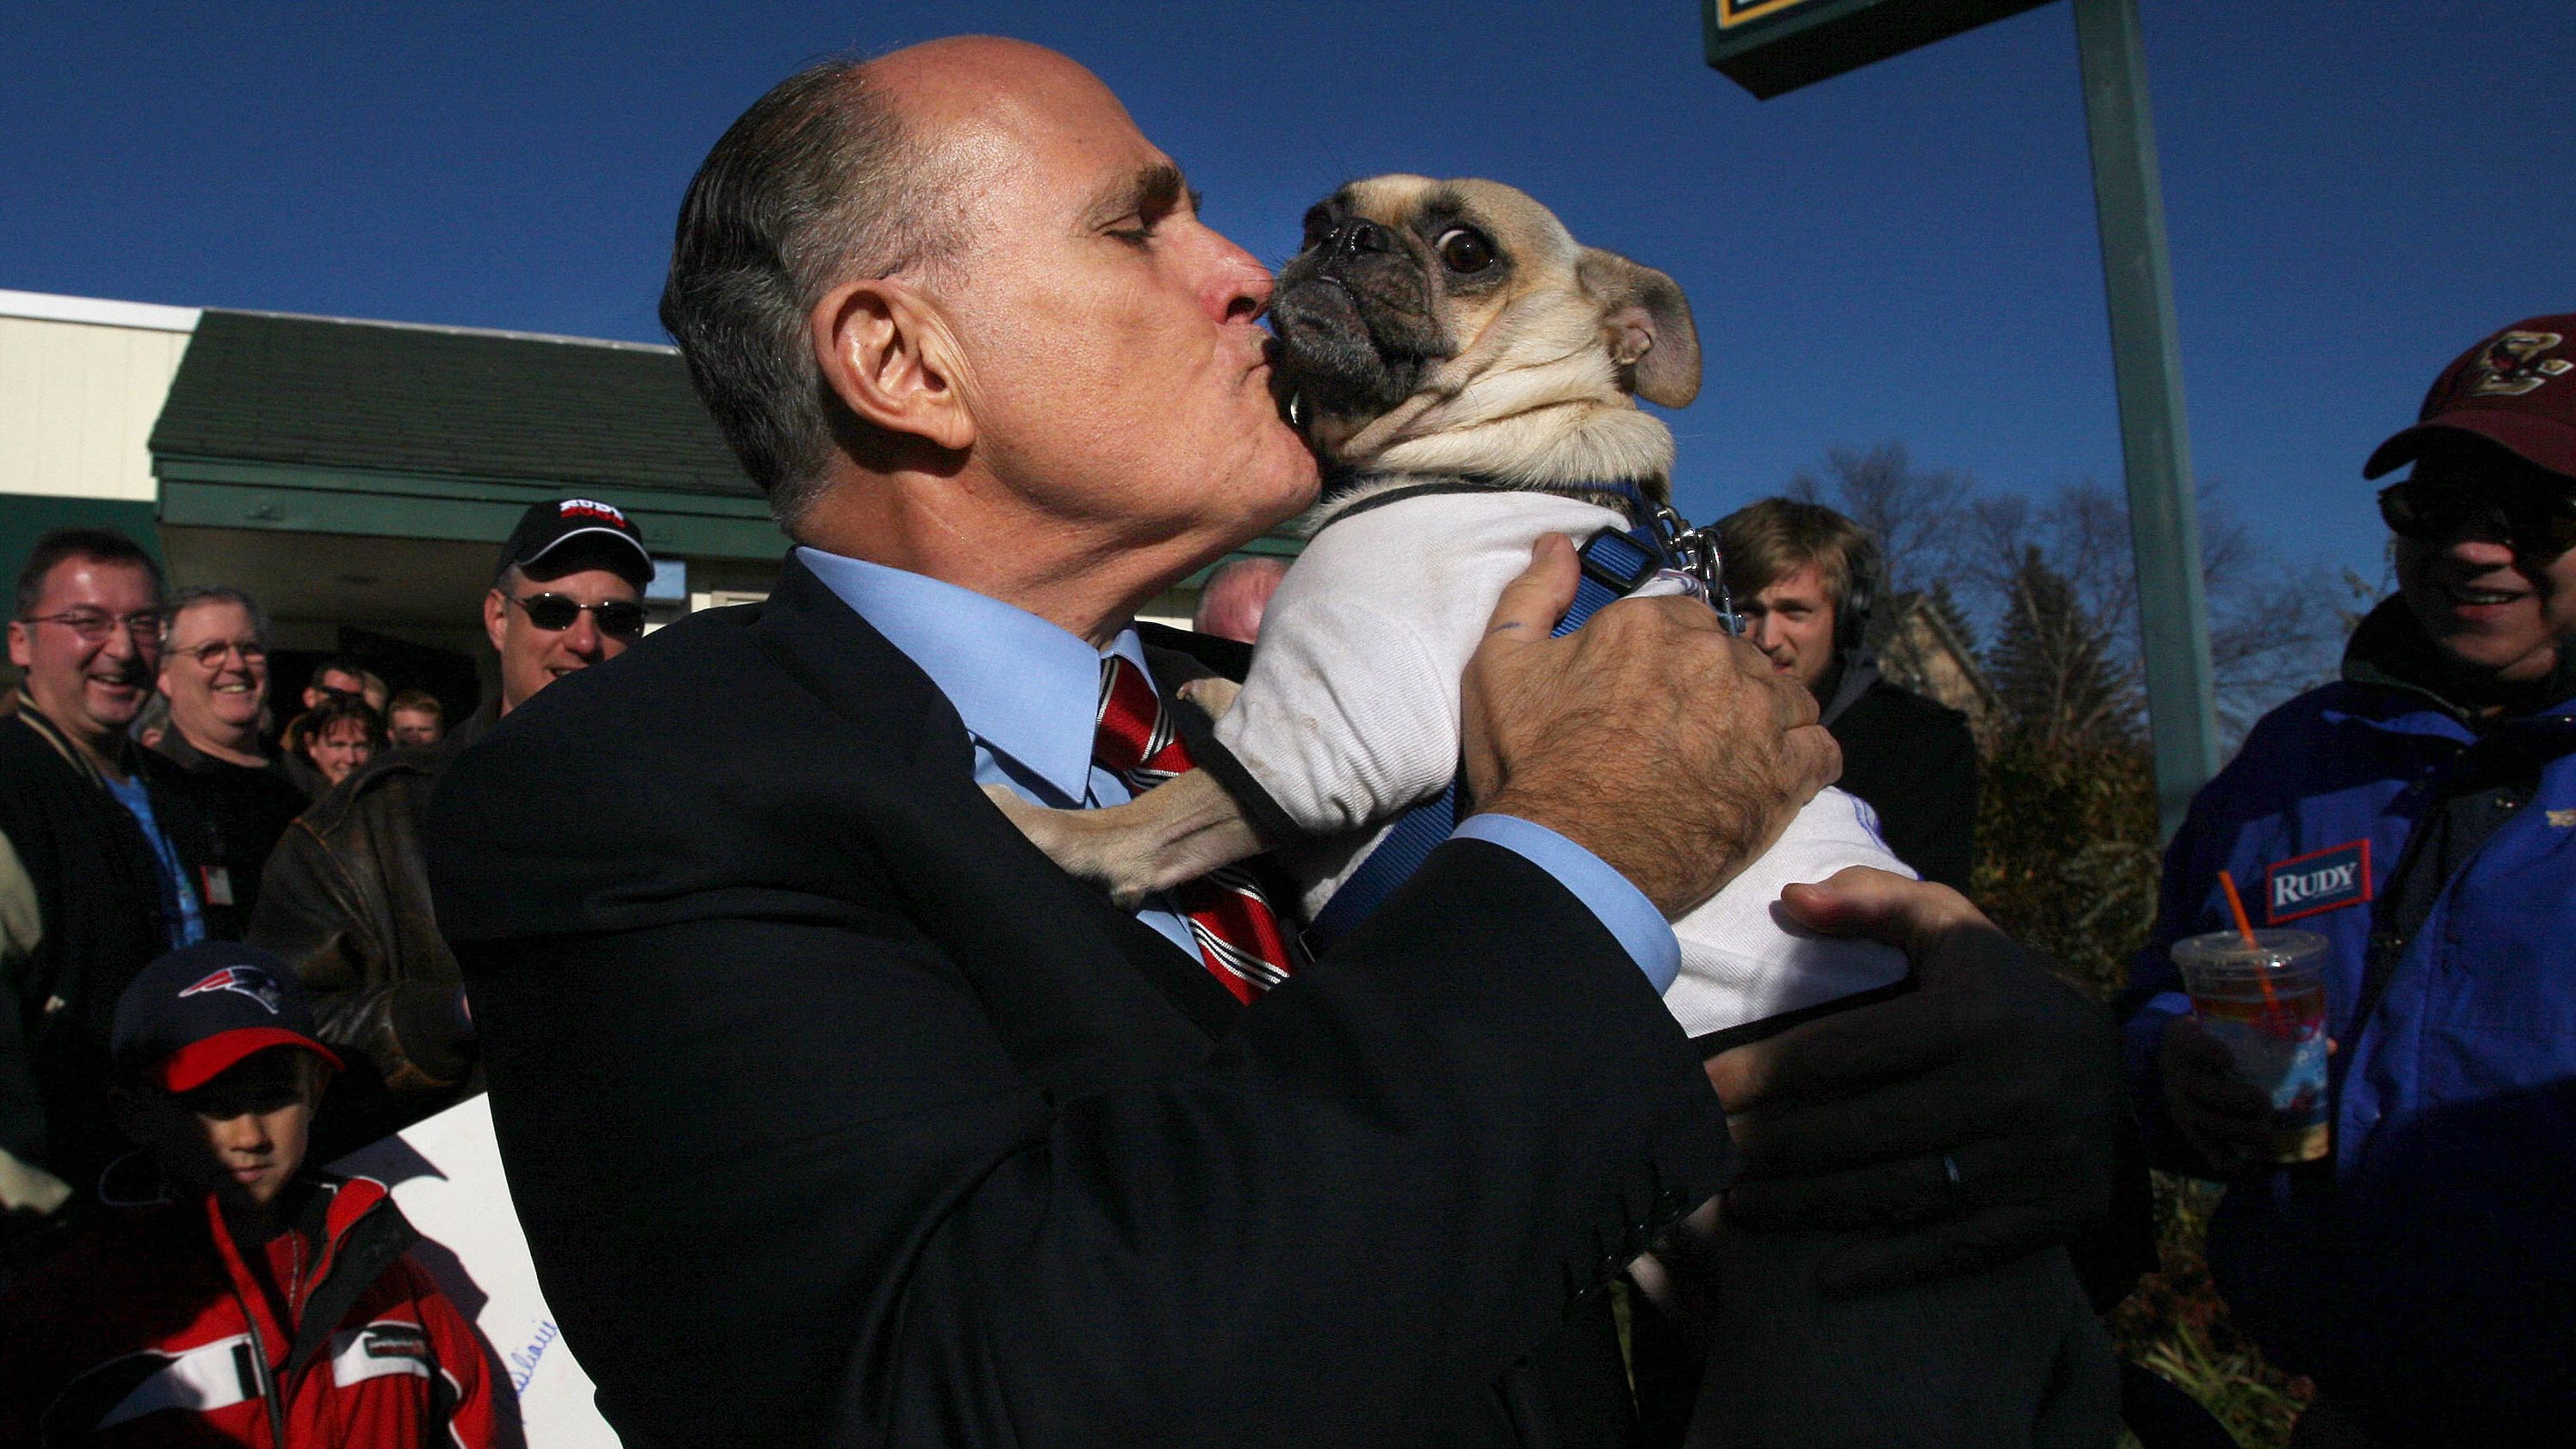 Giuliani kisses Thompson the pug while campaigning in New Hampshire in November 2007. The dog was wearing a shirt that said, "Anybody but Hillary for president."